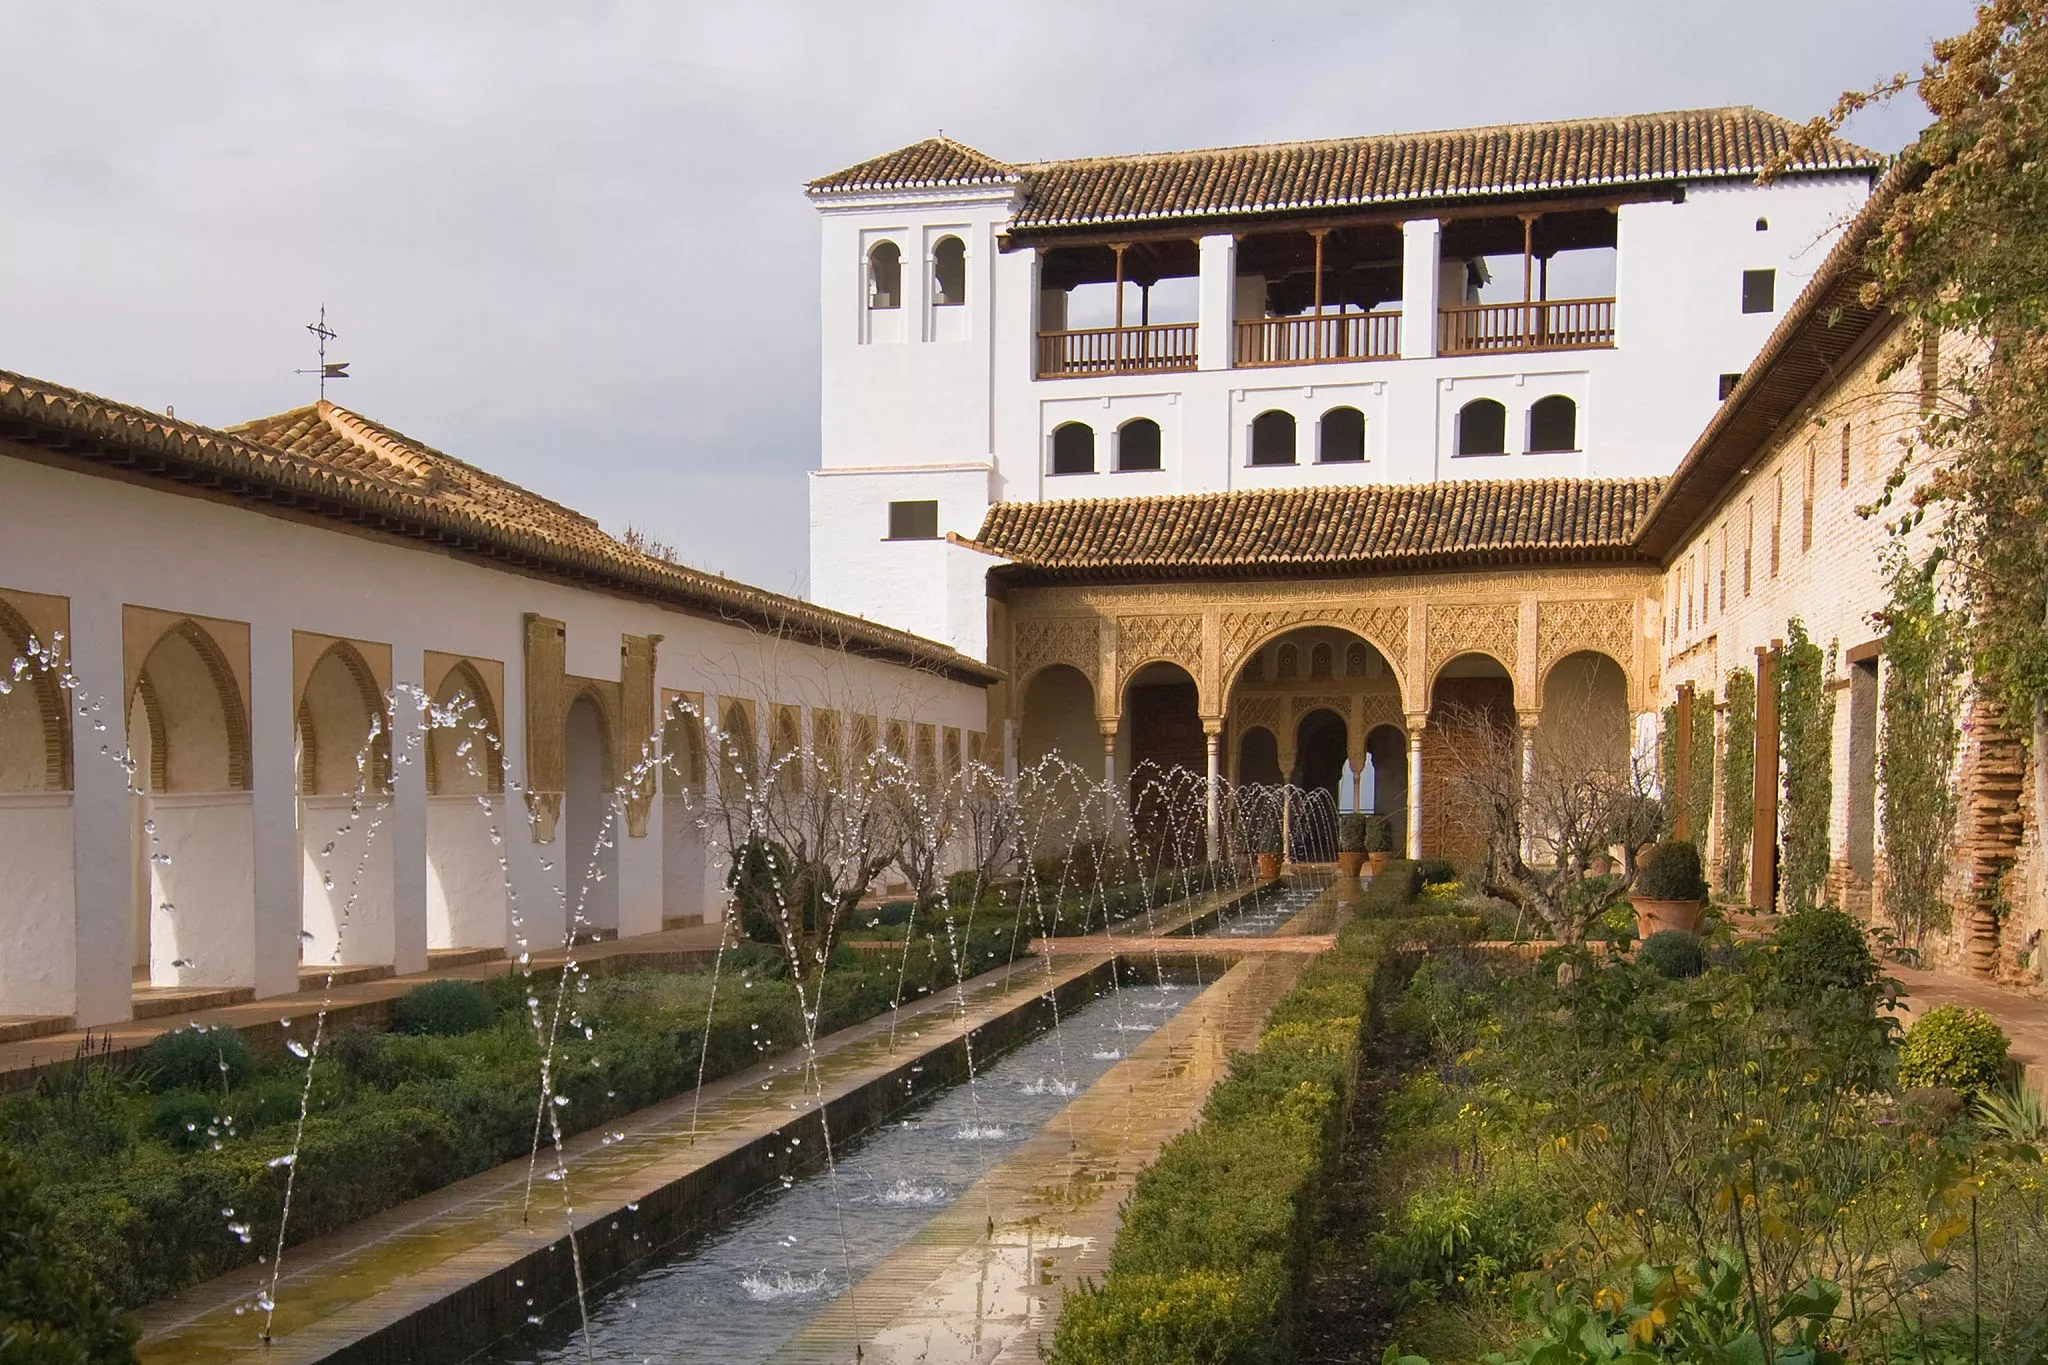 Generalife in Spain, Europe | Architecture - Rated 4